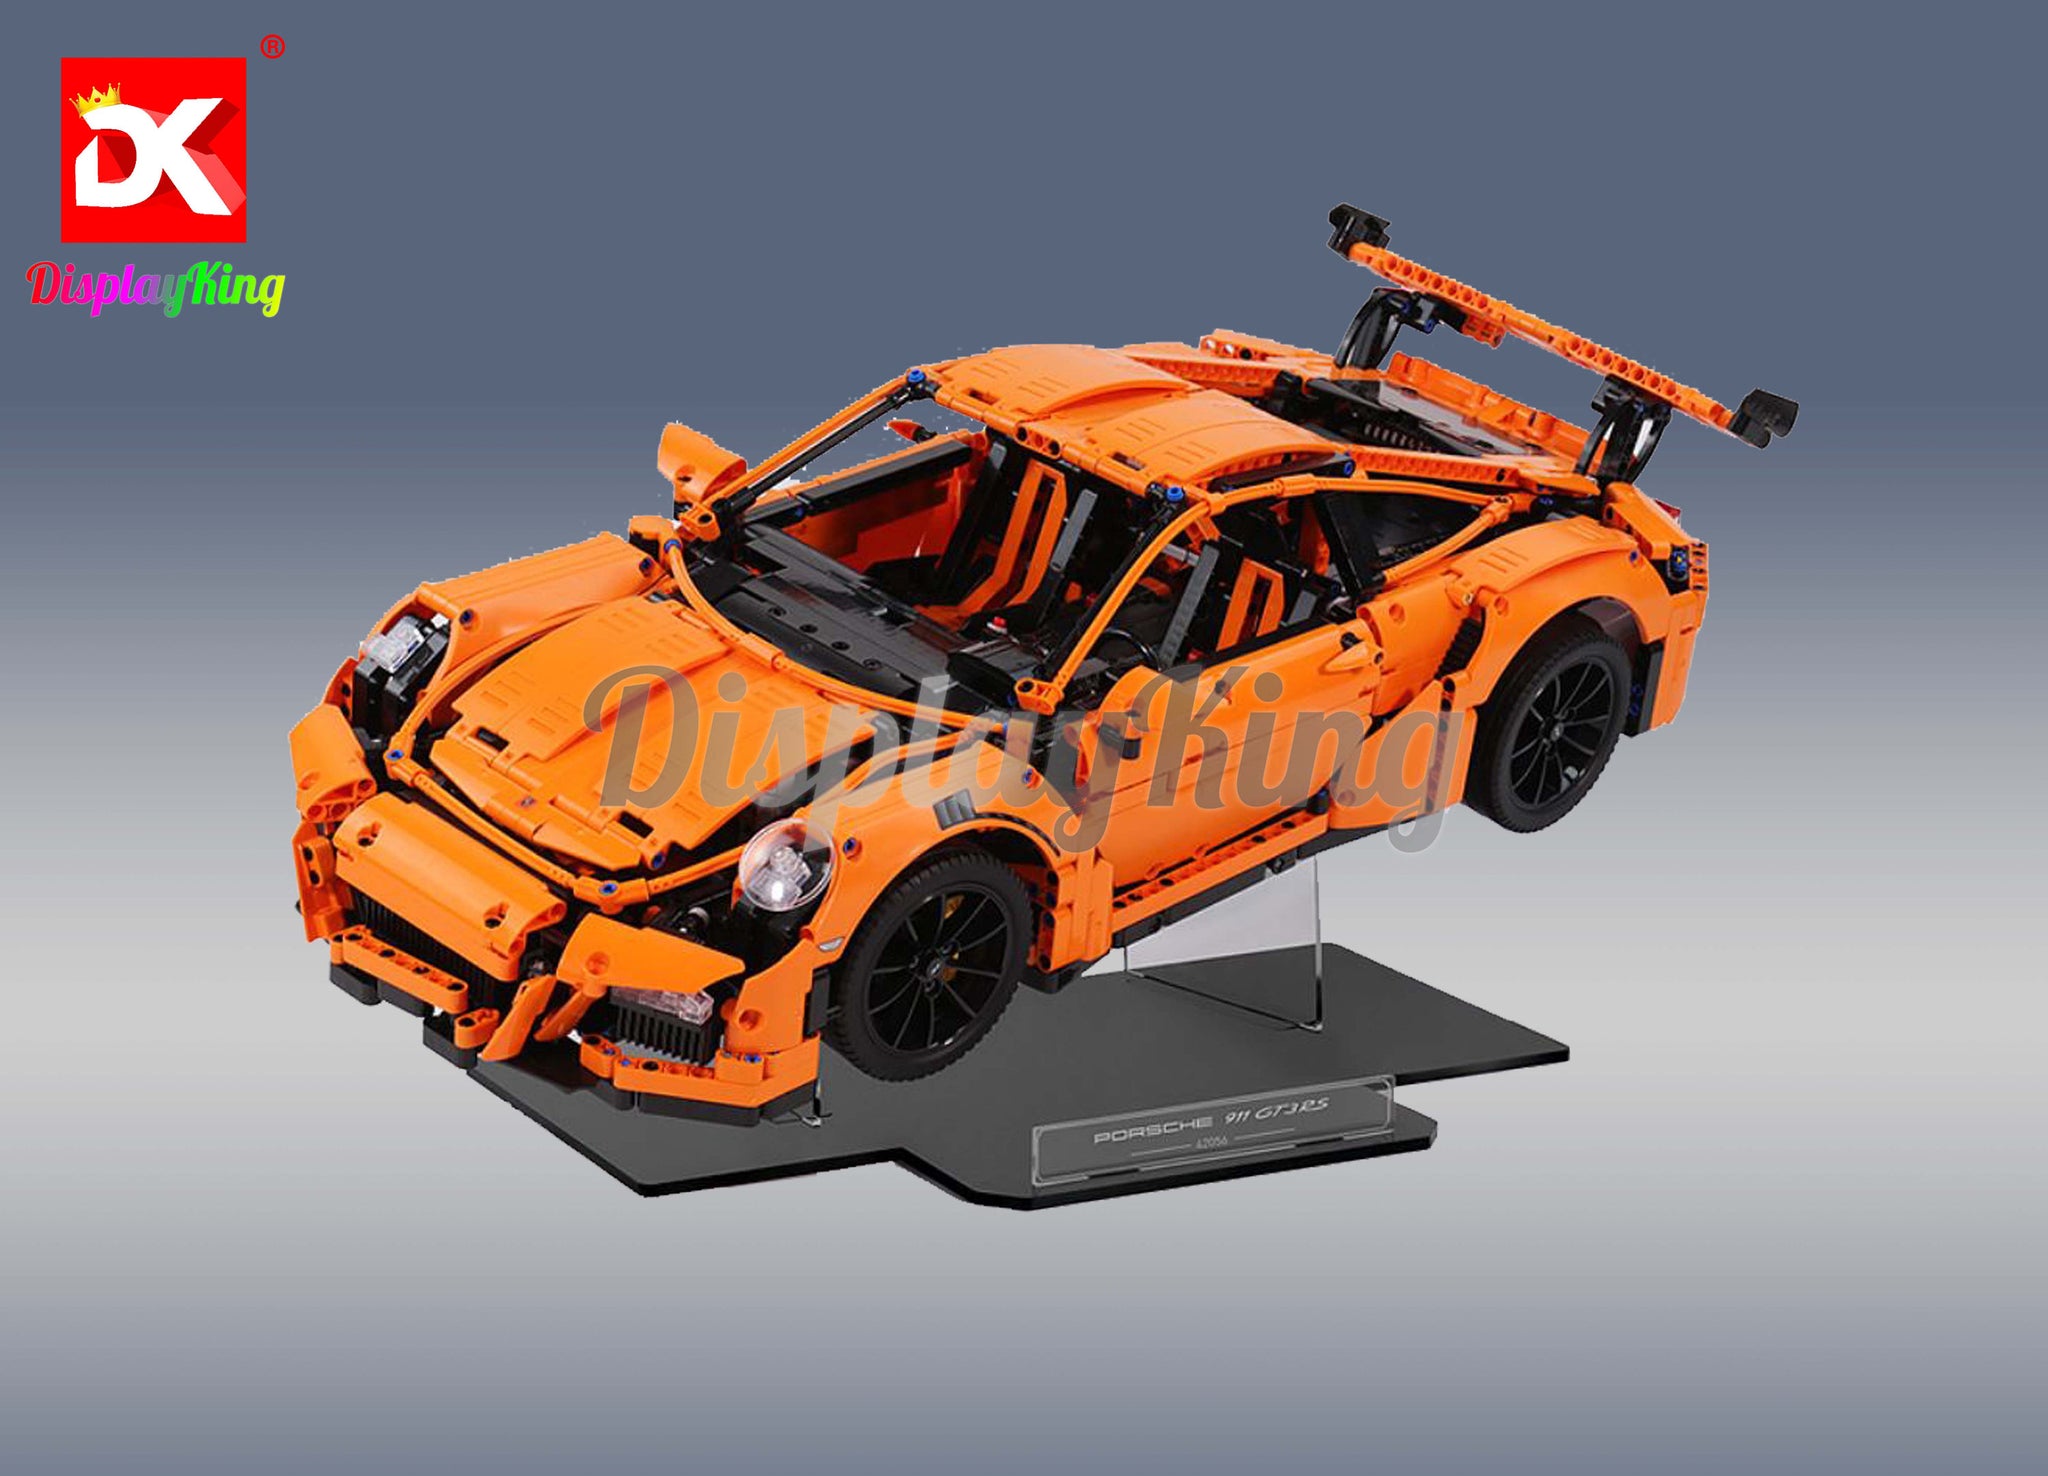 Display Case For LEGO® Porsche 911 GT3 RS Technic 42056